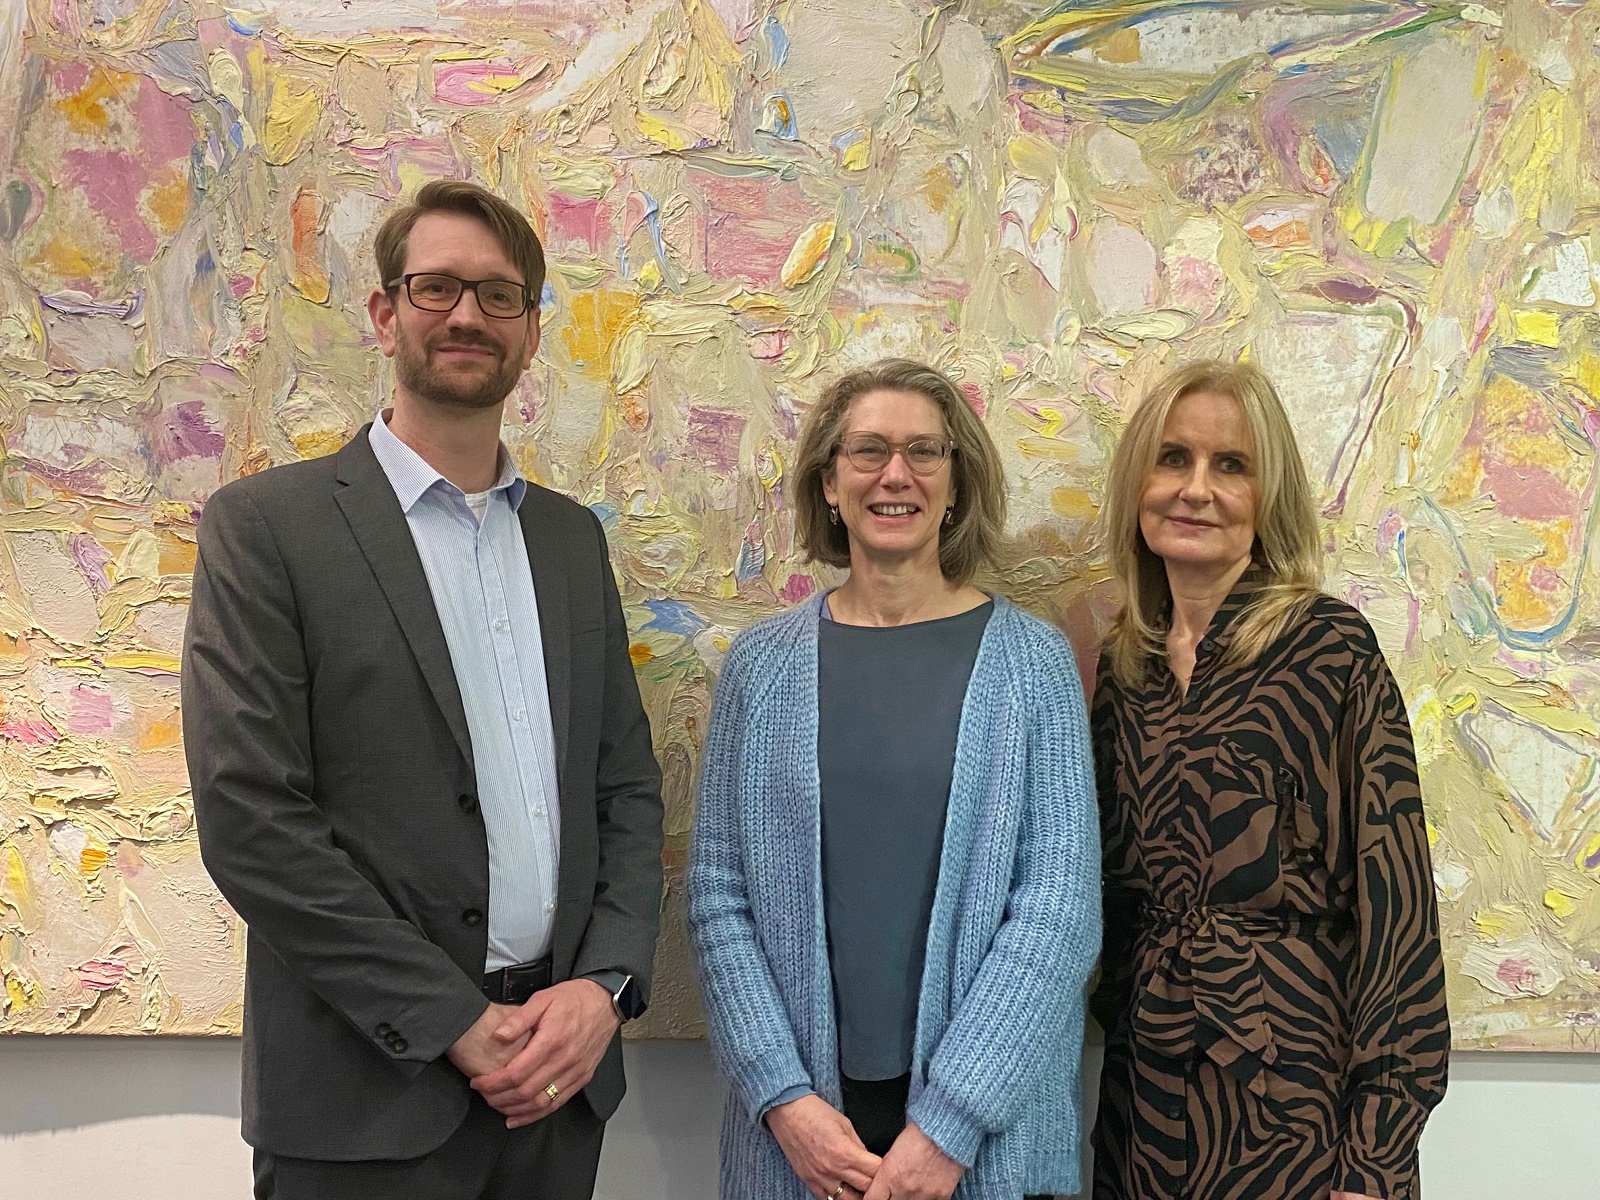 The cultural department of the Dutch Embassy in the UK, with Cultural Counsellor Astrid de Vries in the middle, Policy Officer Koen Guiking on the left and Support Officer Trudy Barnes on the right.